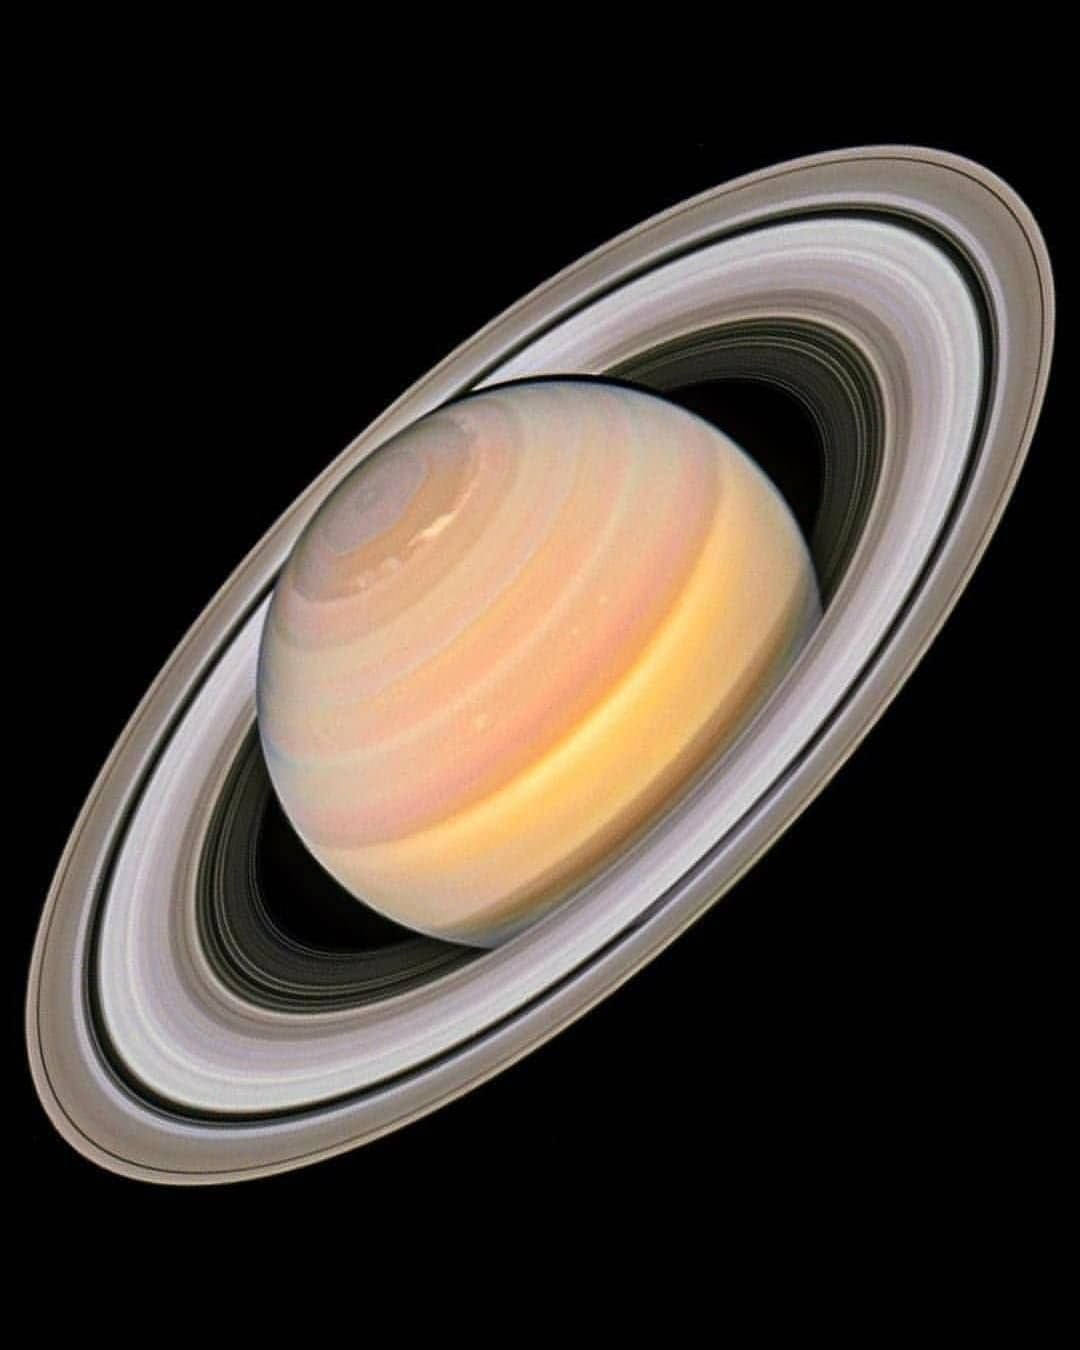 Premium Photo | Saturn Jewel of the Solar System with its majestic rings